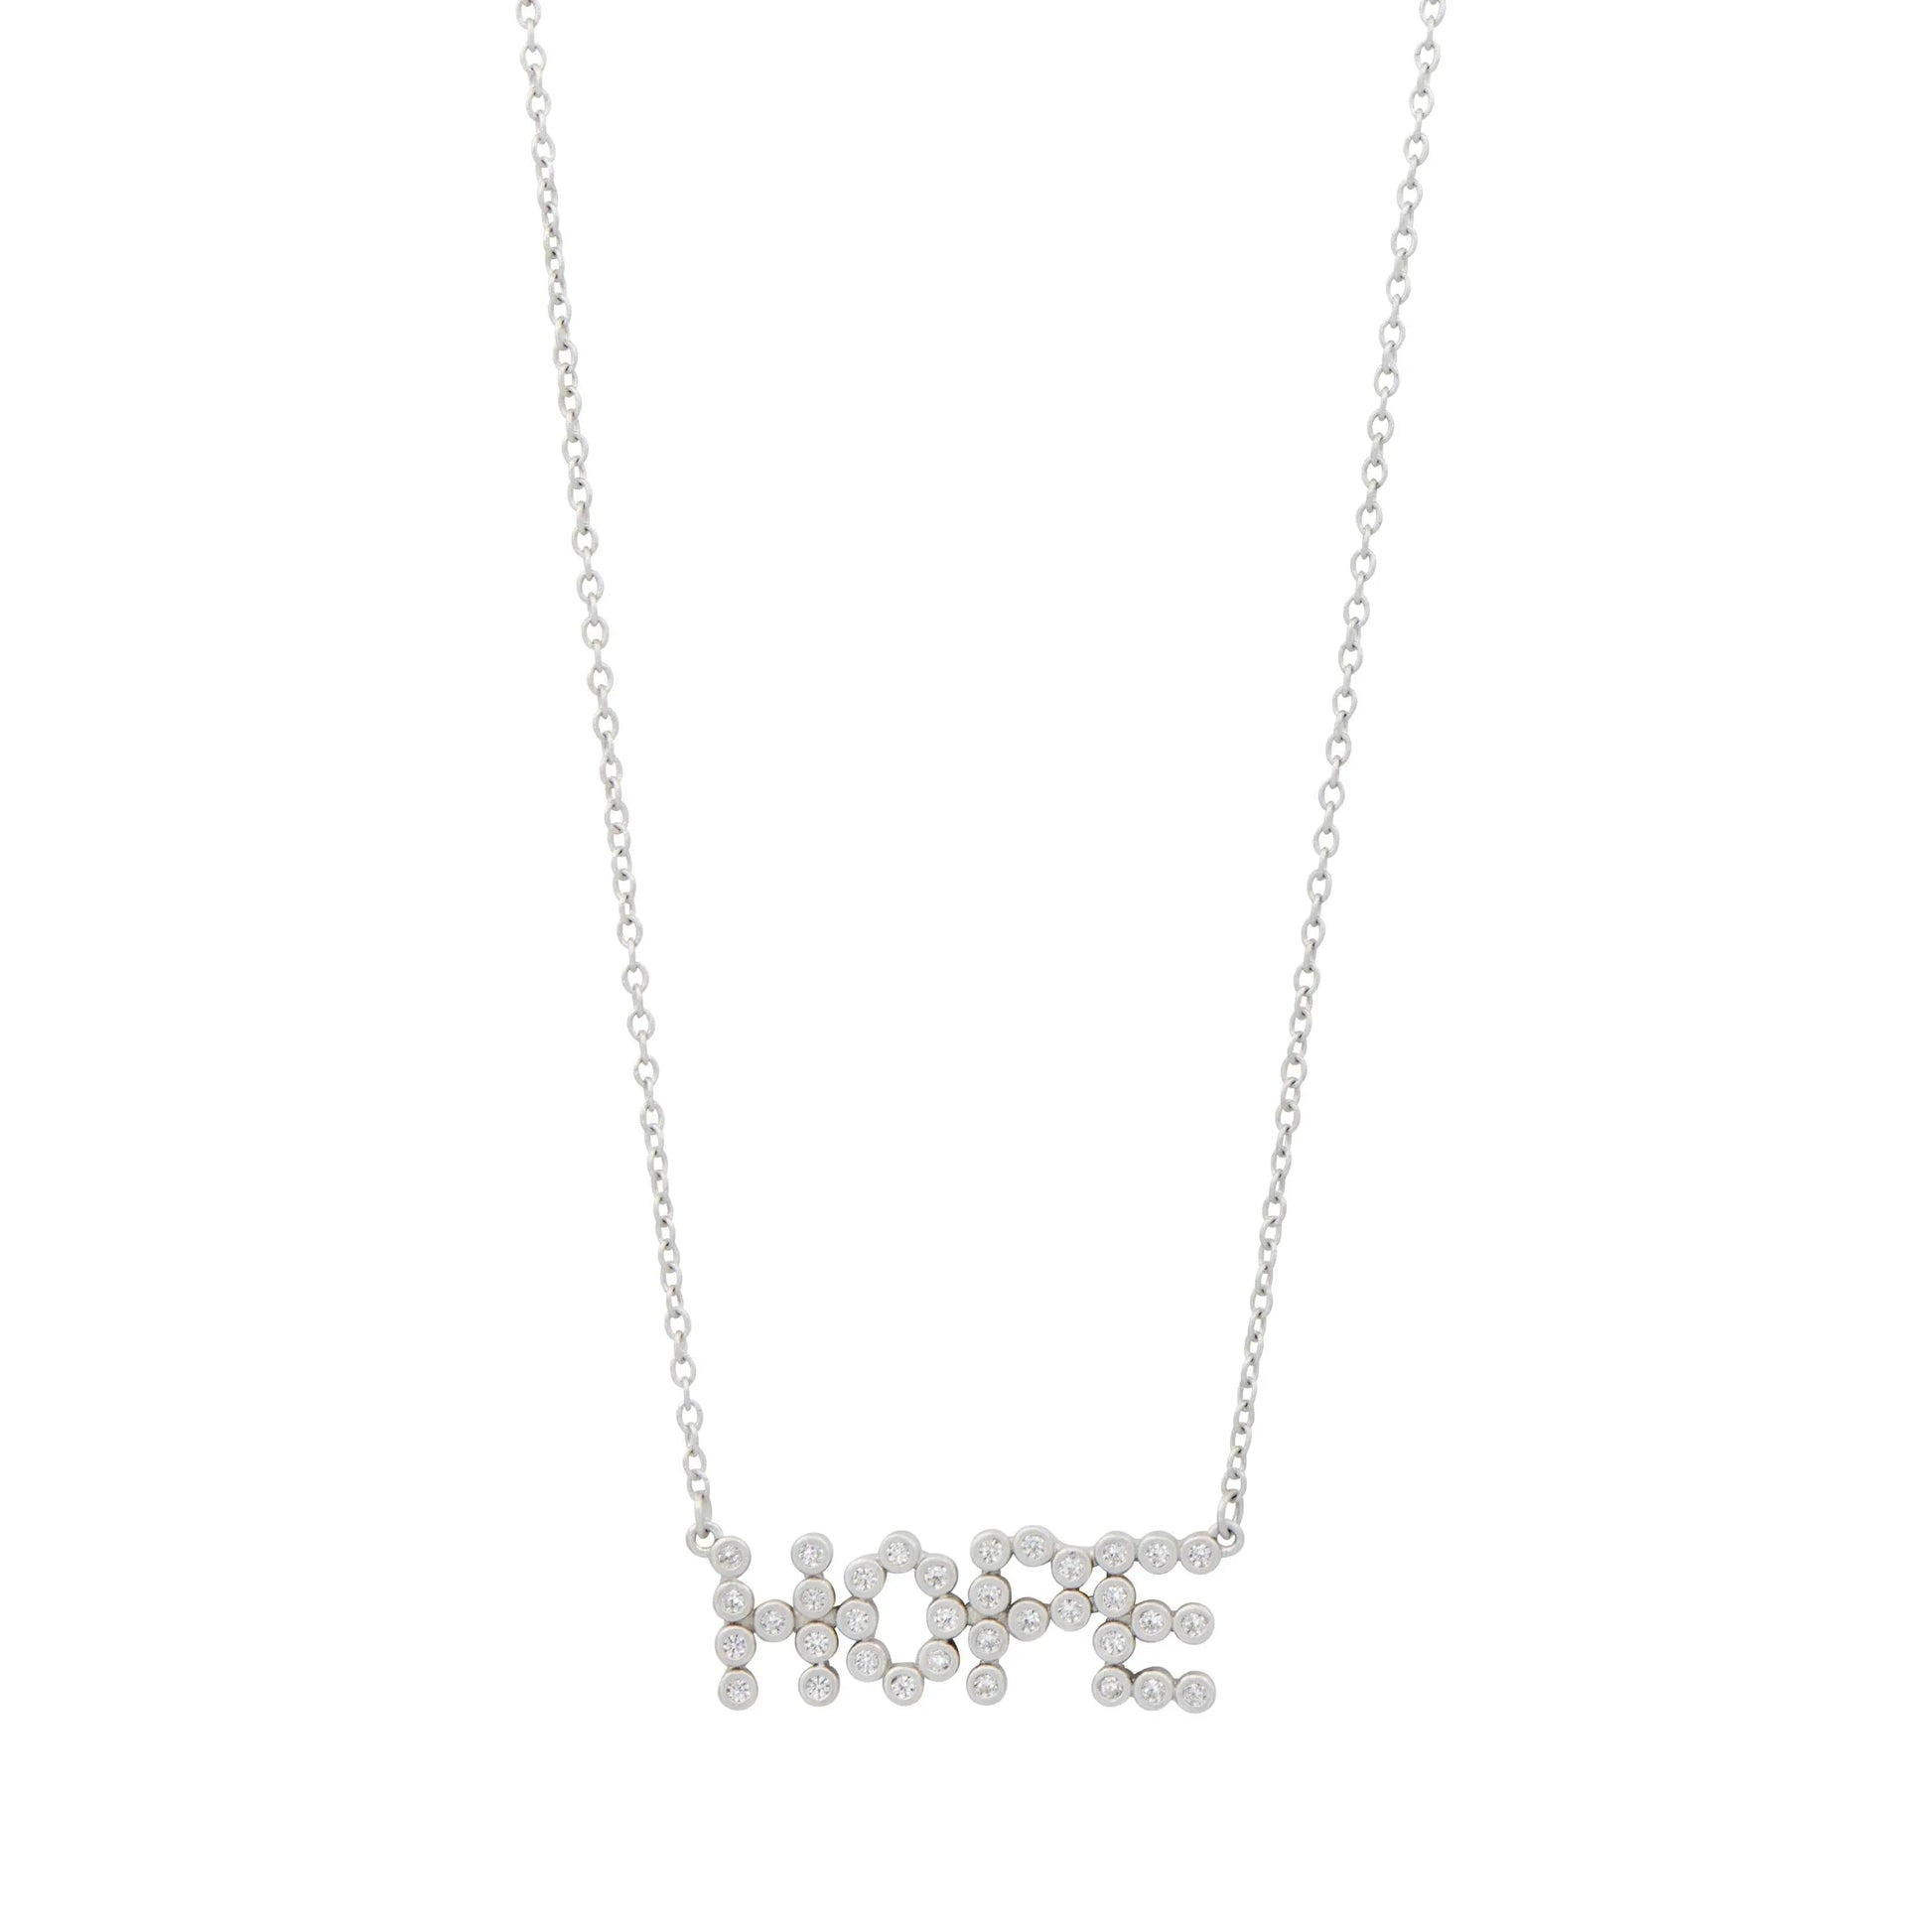 Silver Sparkling Hope Necklace Women of Strength NECKLACE